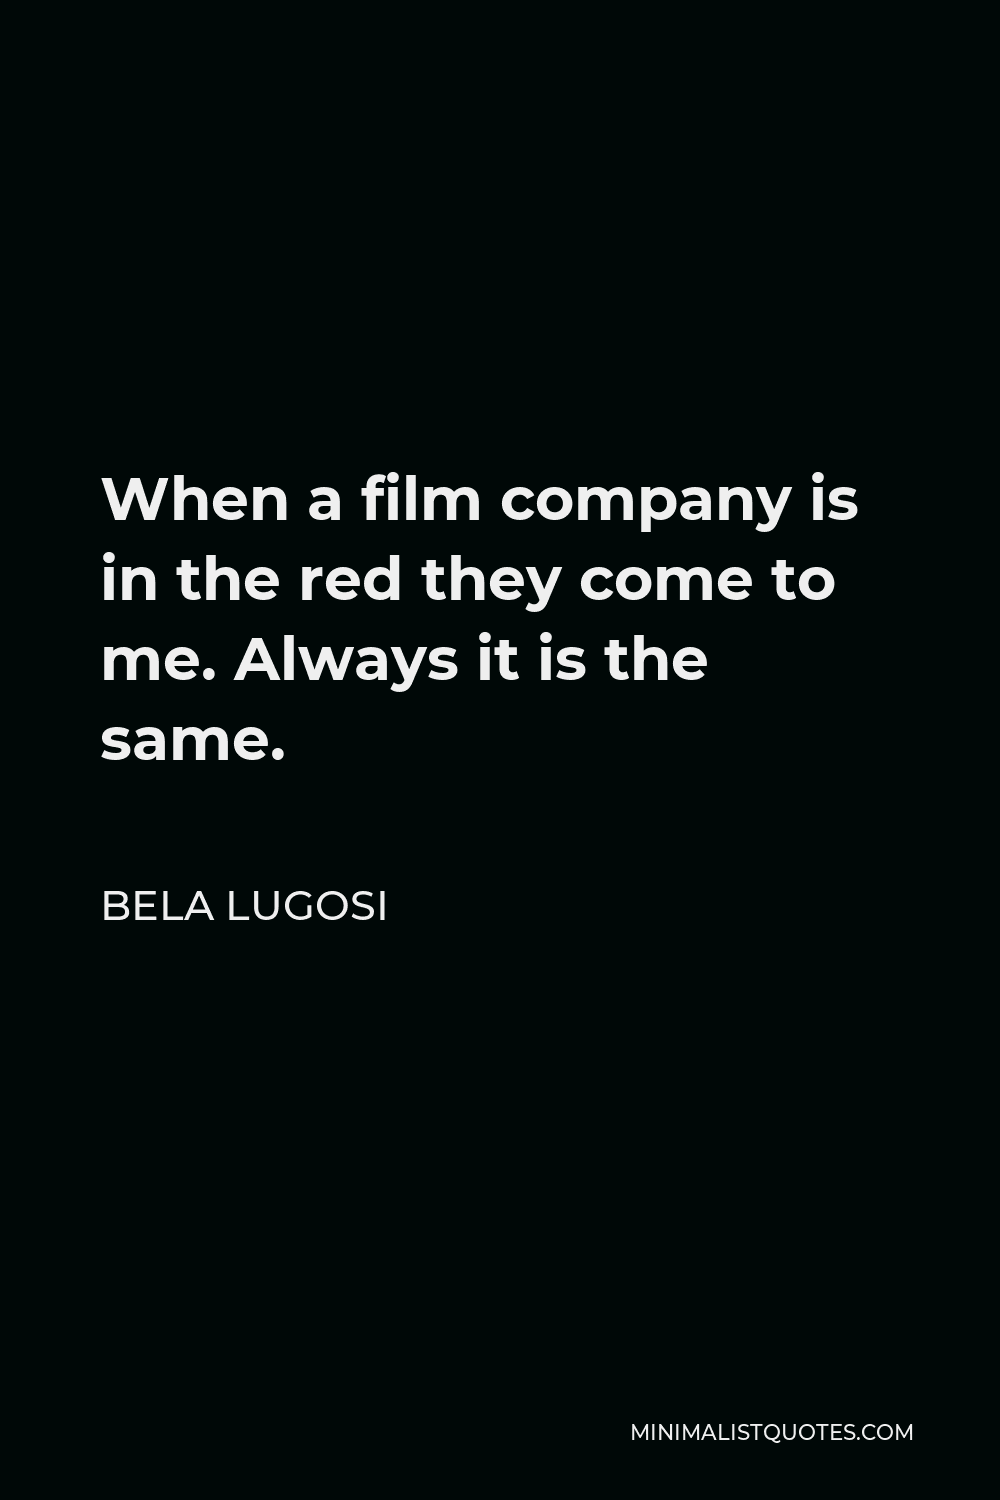 Bela Lugosi Quote - When a film company is in the red they come to me. Always it is the same.